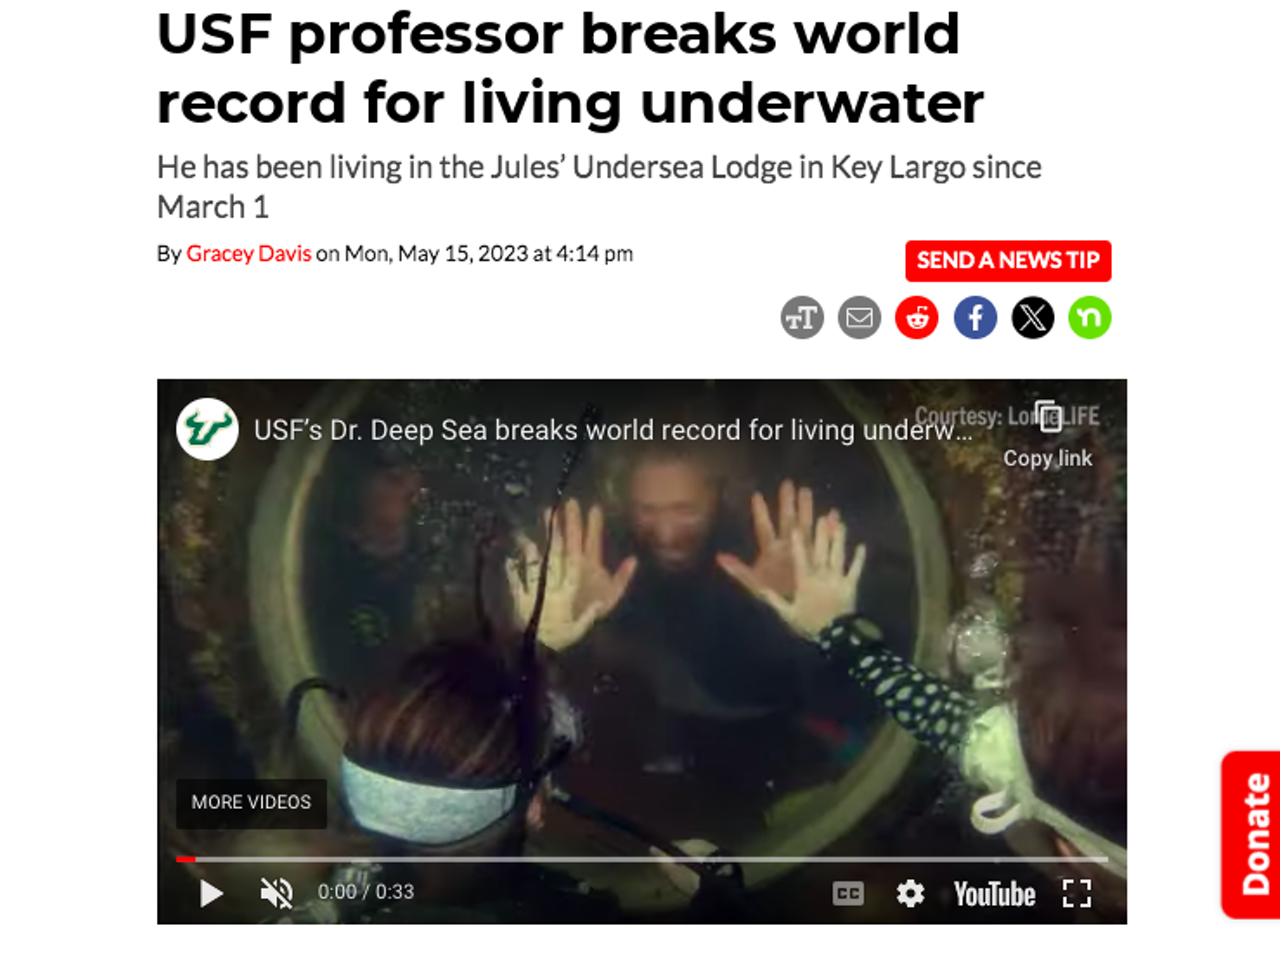 Dr. Joseph Dituri, known to his students and colleagues as Dr. Deep Sea, broke the world record for underwater living last spring. The previous record, held by Tennessee teachers Bruce Cantrell and Jessica Fain, was set in 2014 at 73 days. Read the full story here. 